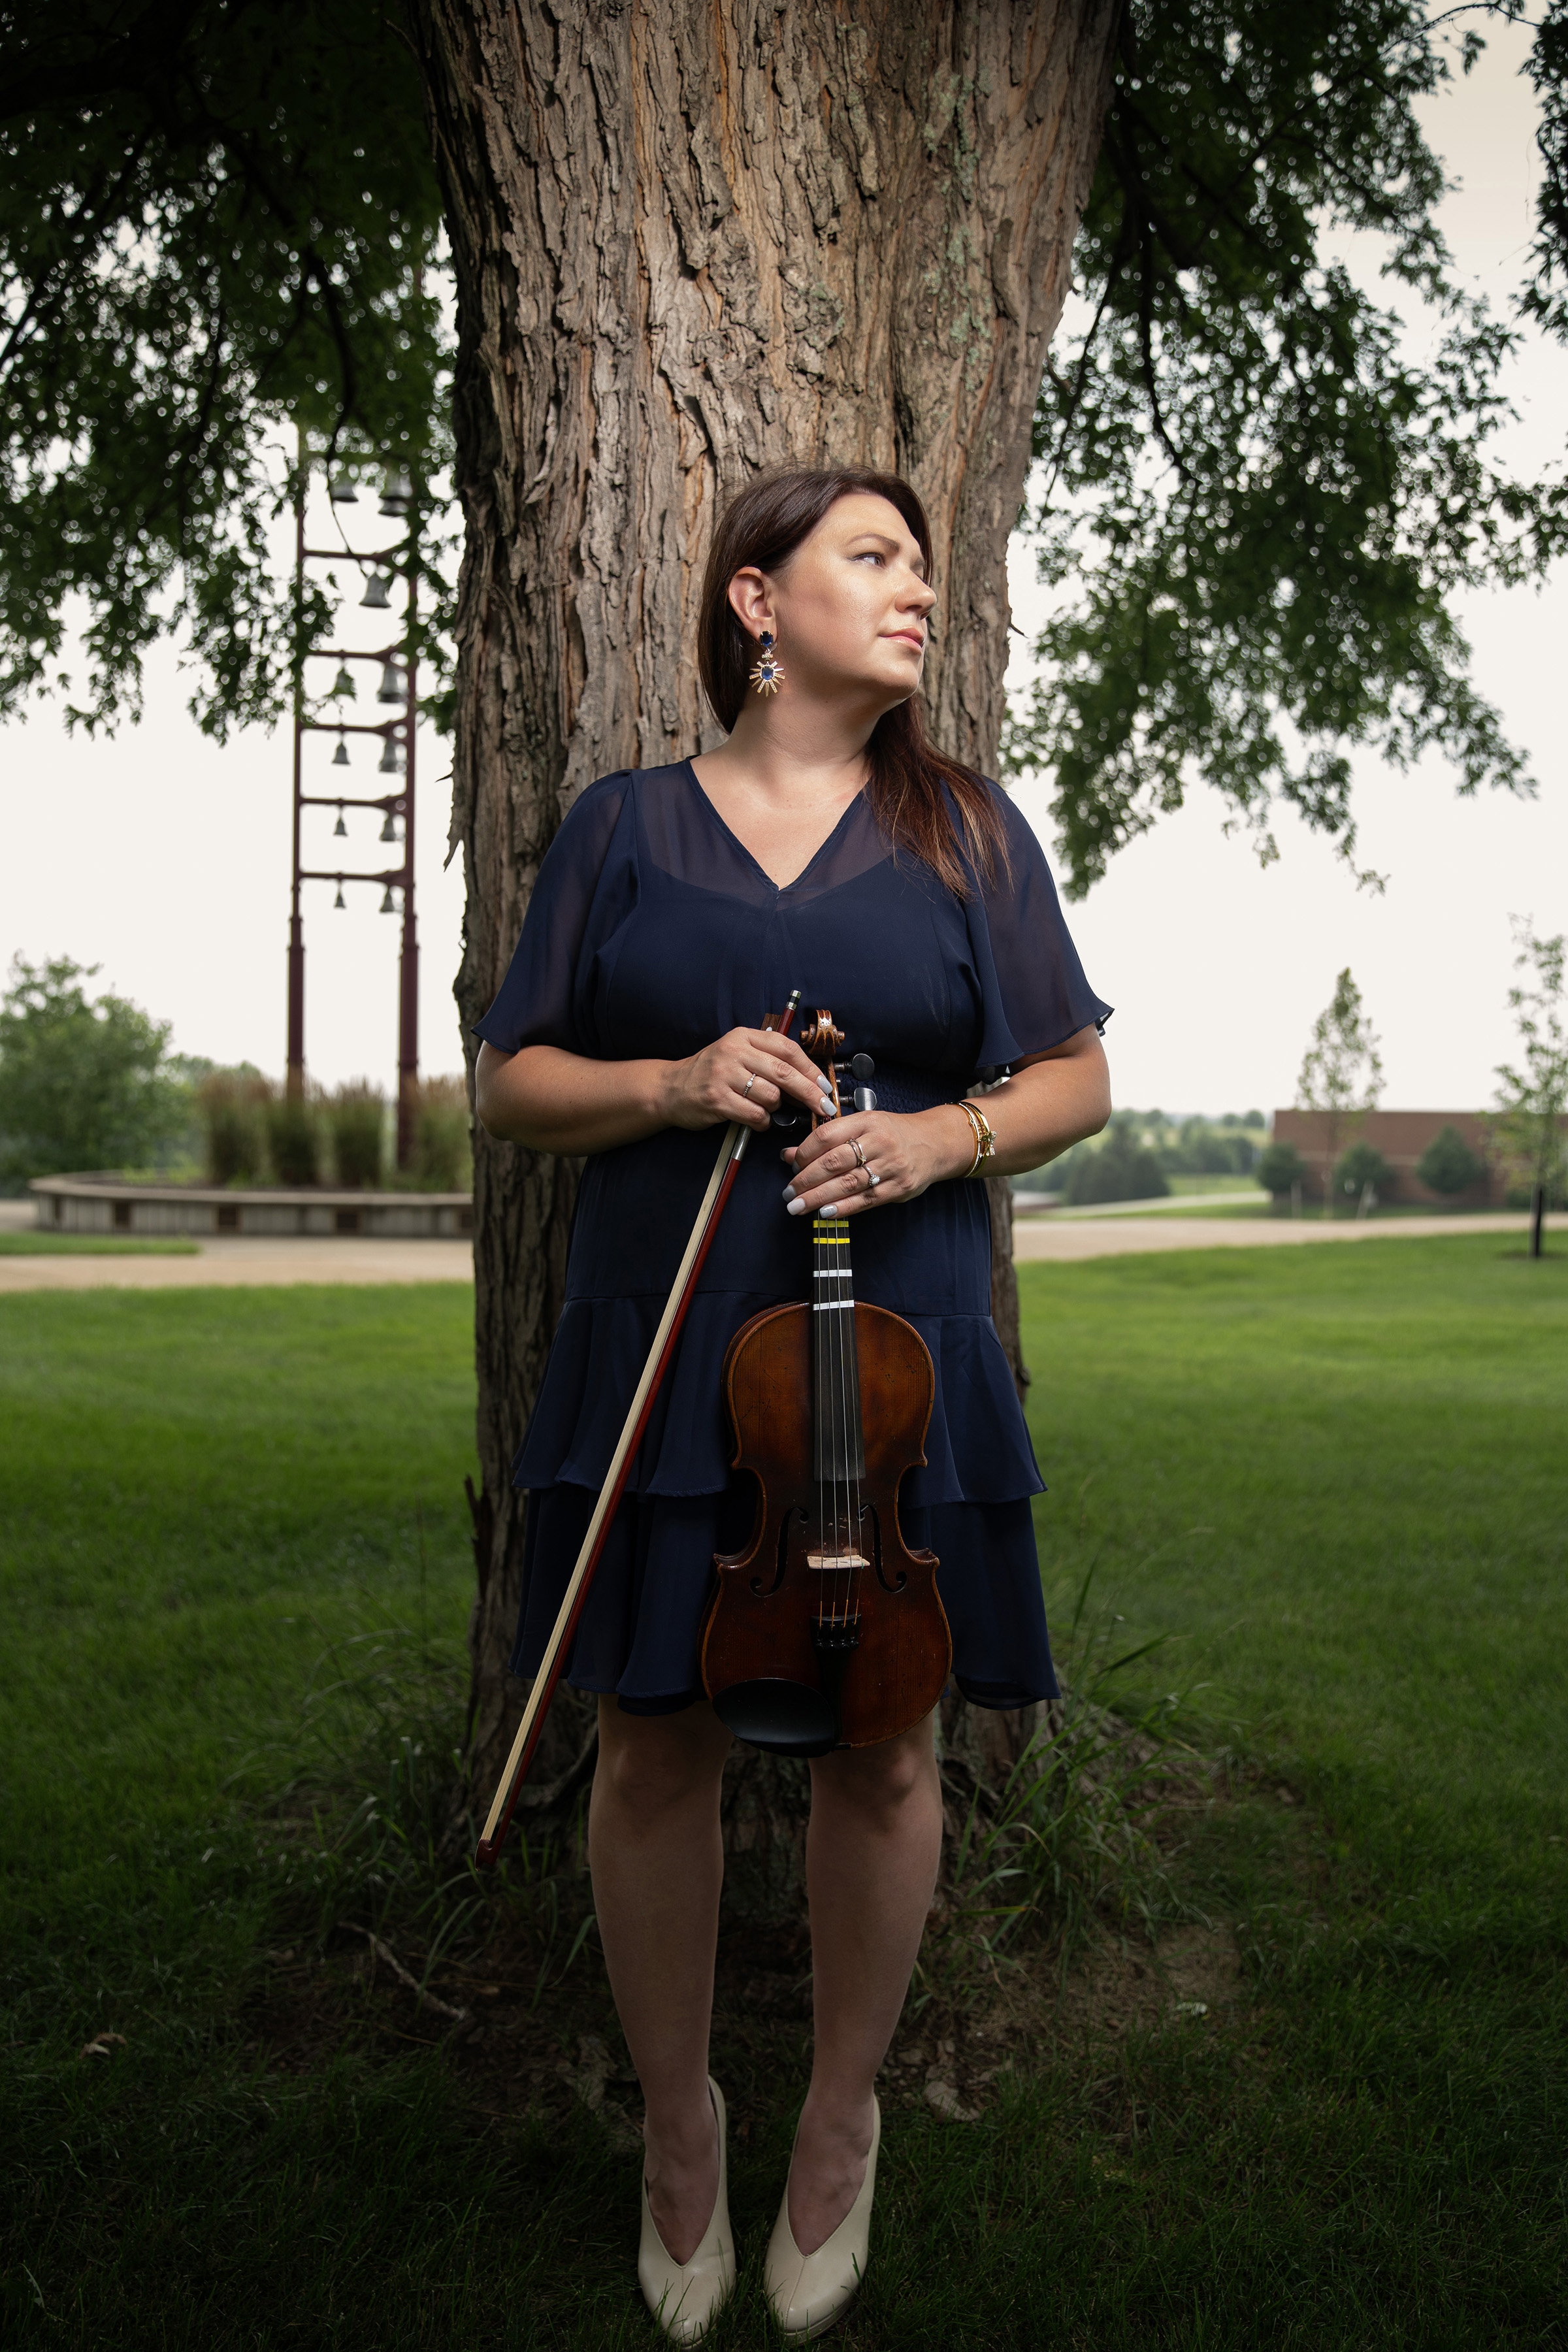 Bequie Perry posting with violin in front of a tree photo by Cardoni